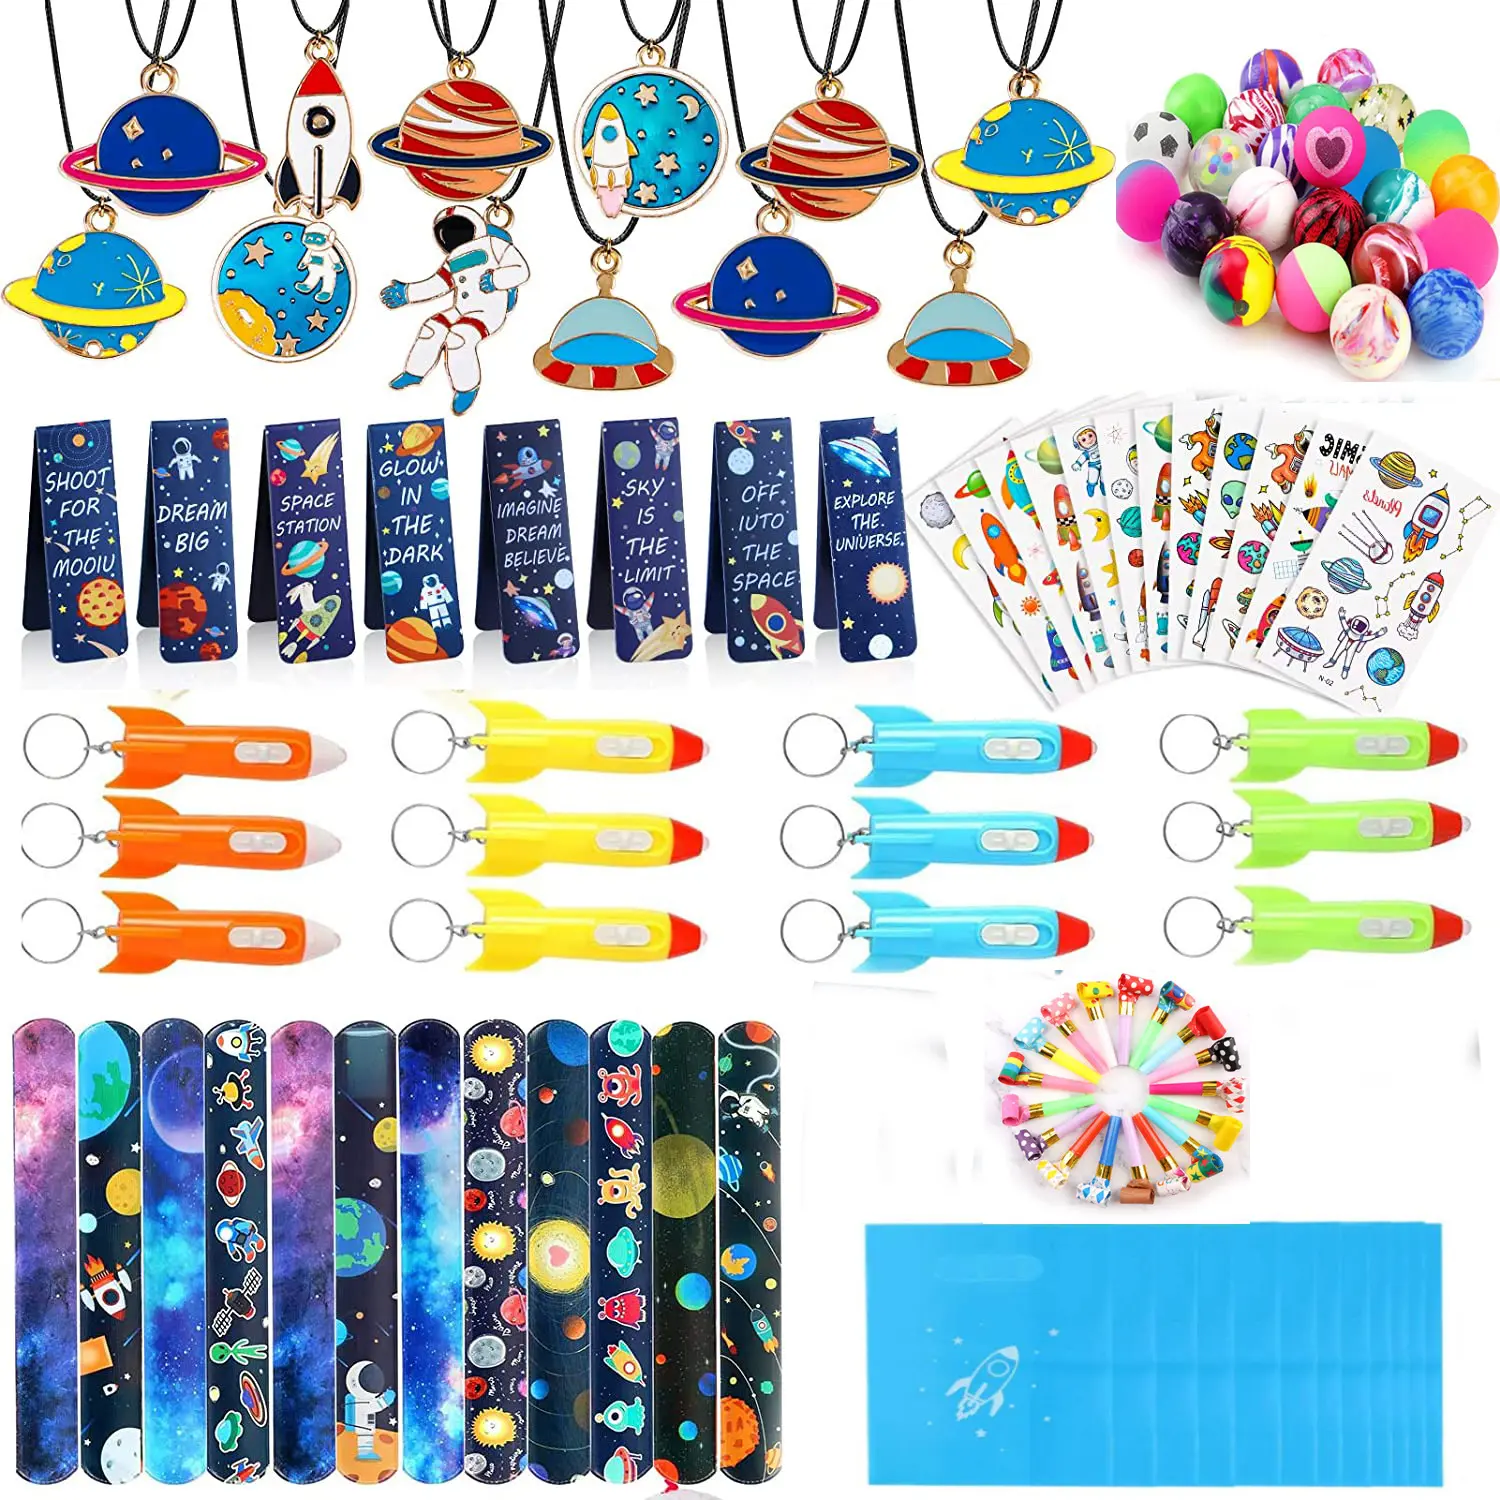 Space Universe Starry Sky Party Necklace Set Decorative Gift Toys 88Pcs Space Party Toys For Kids Favor Gift Set